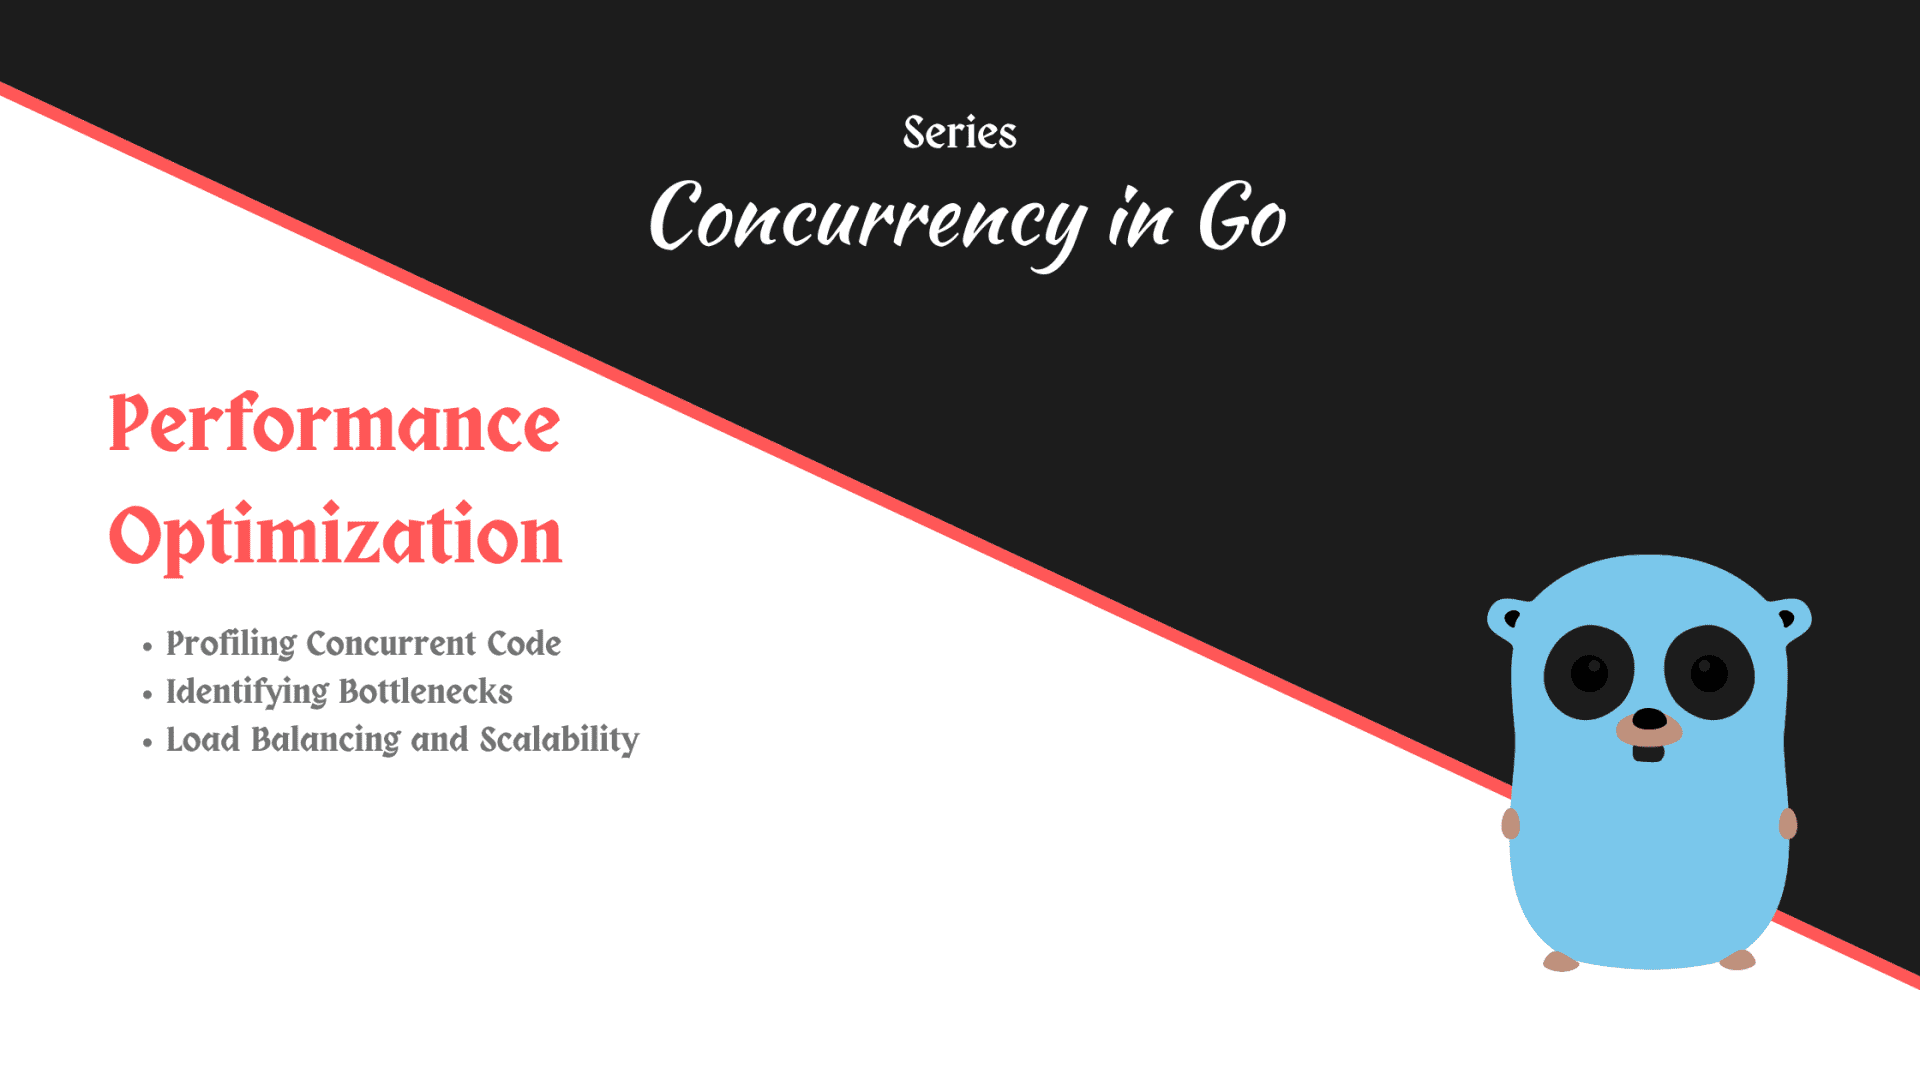 Performance Considerations and Optimization in Go